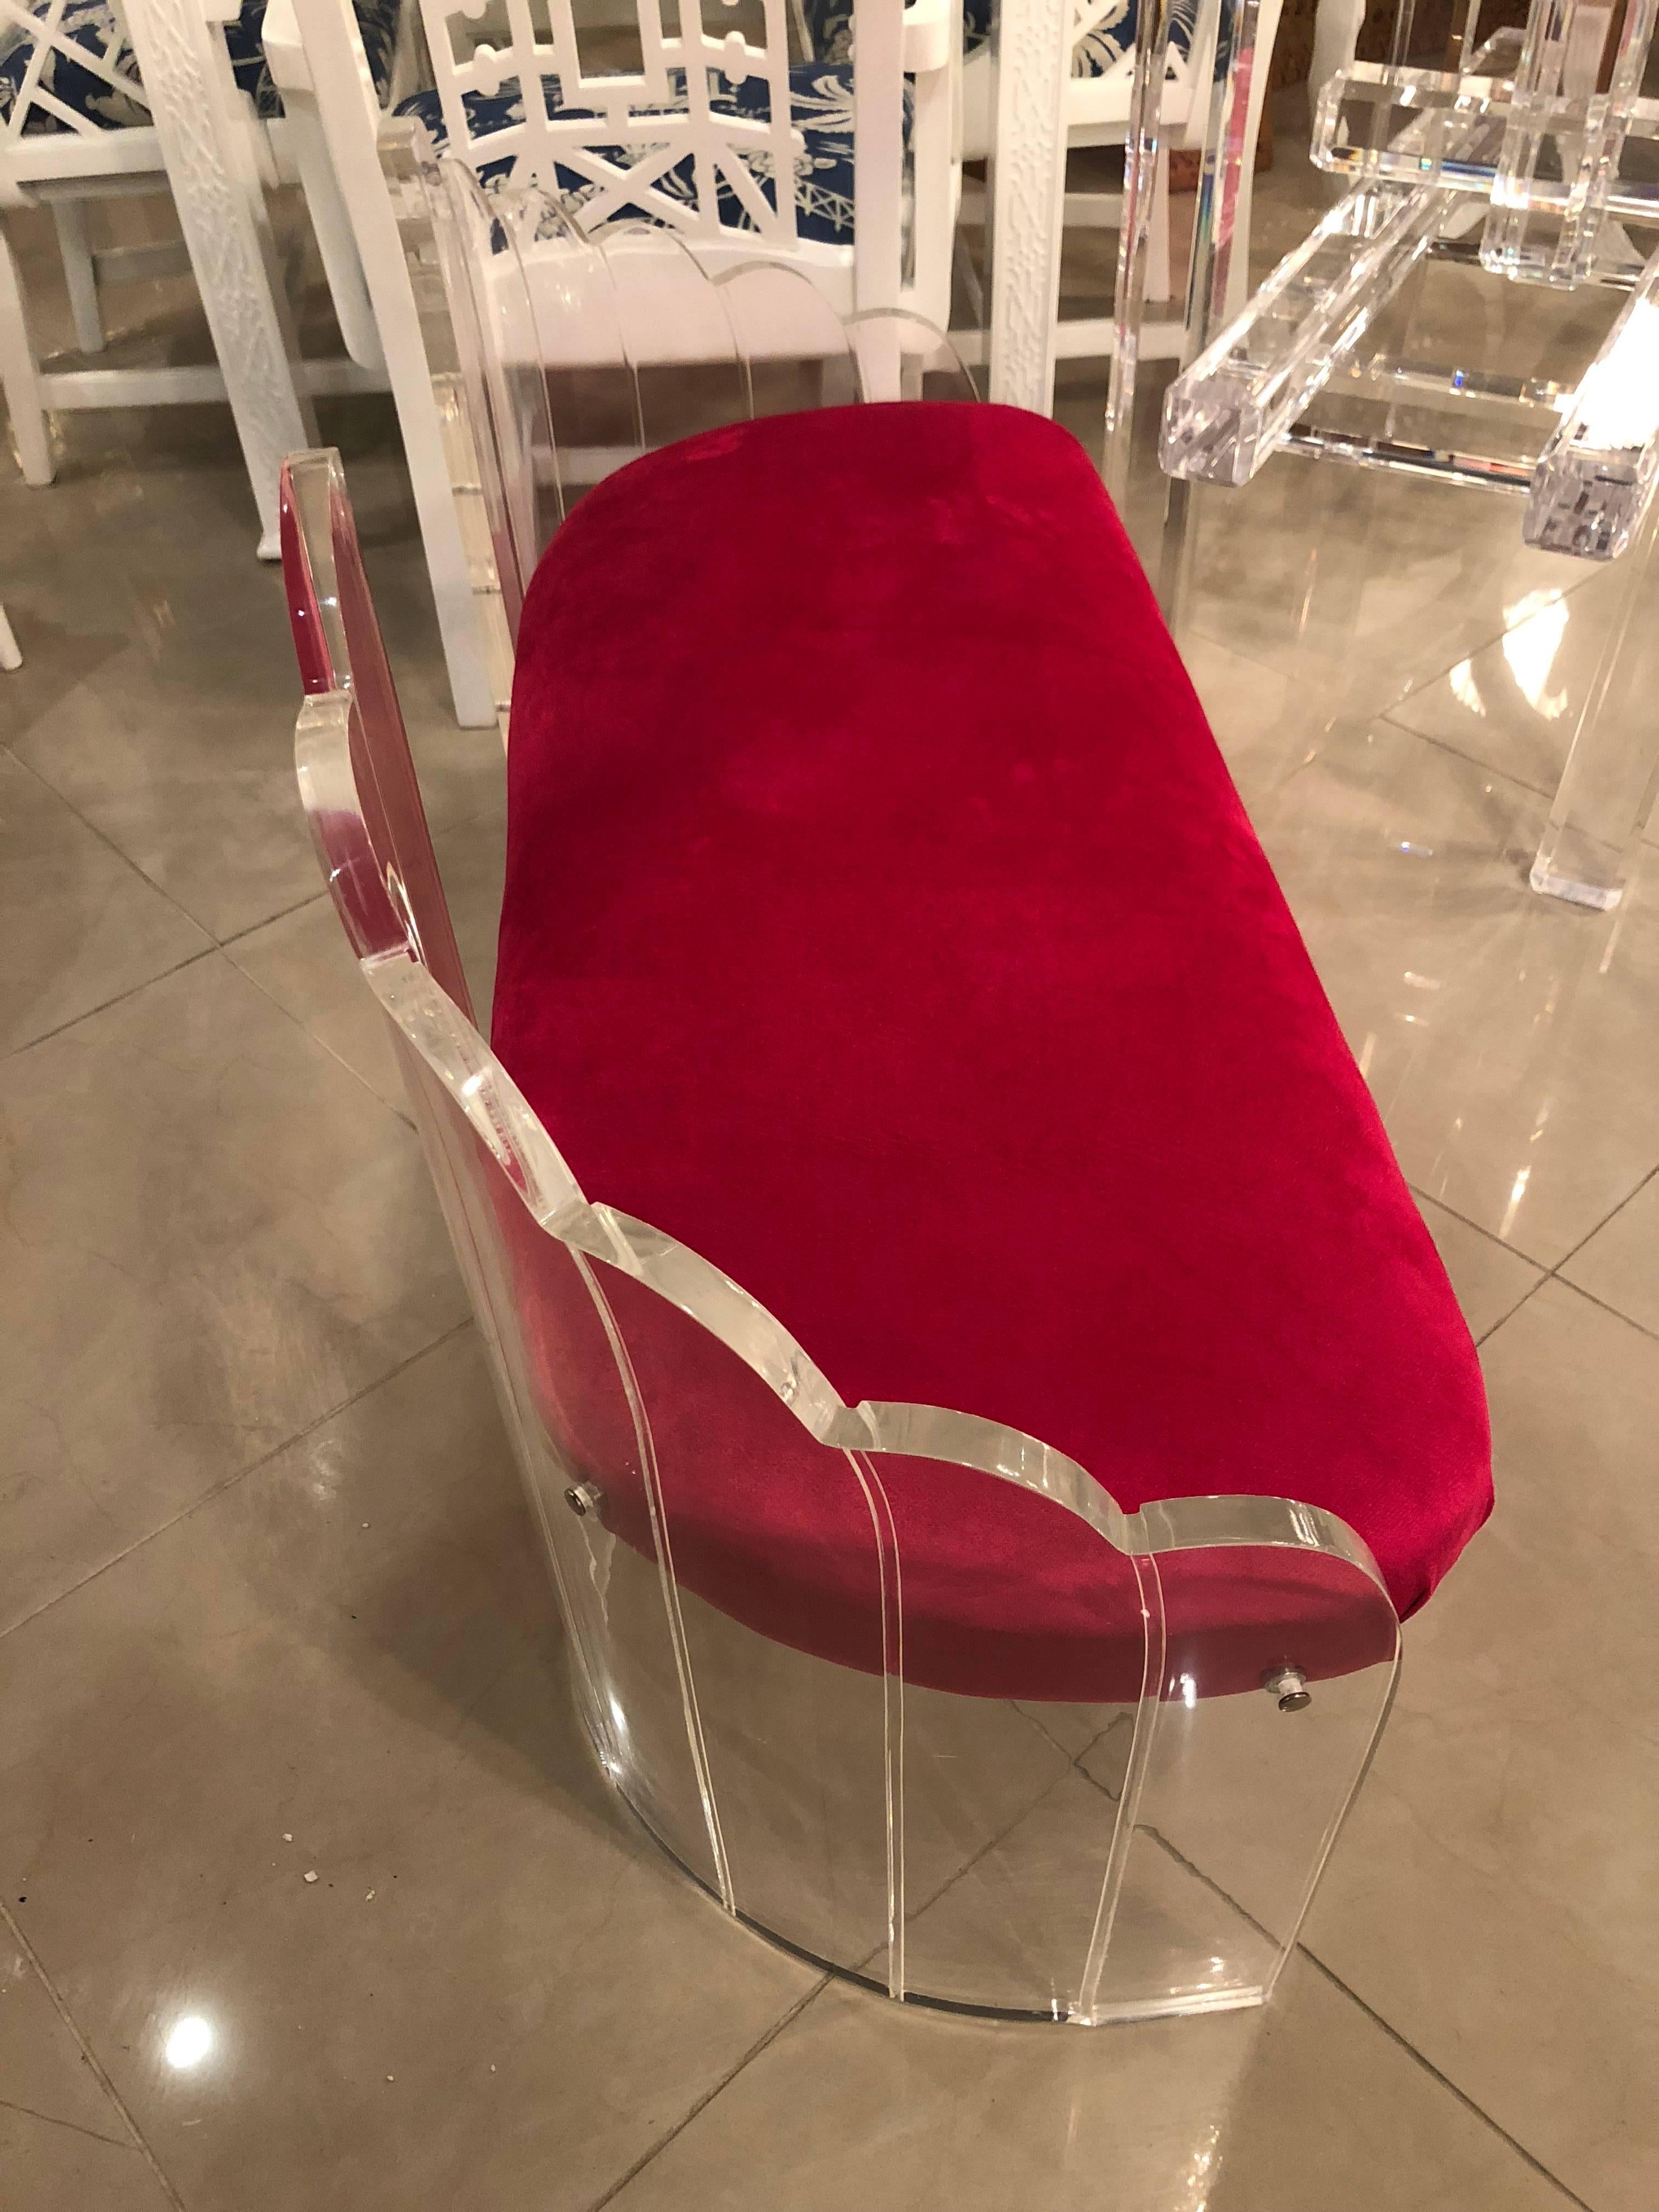 Vintage Lucite bench that has been meticulously restored. The Lucite has been professionally polished. Newly upholstered in a hot pink velvet.